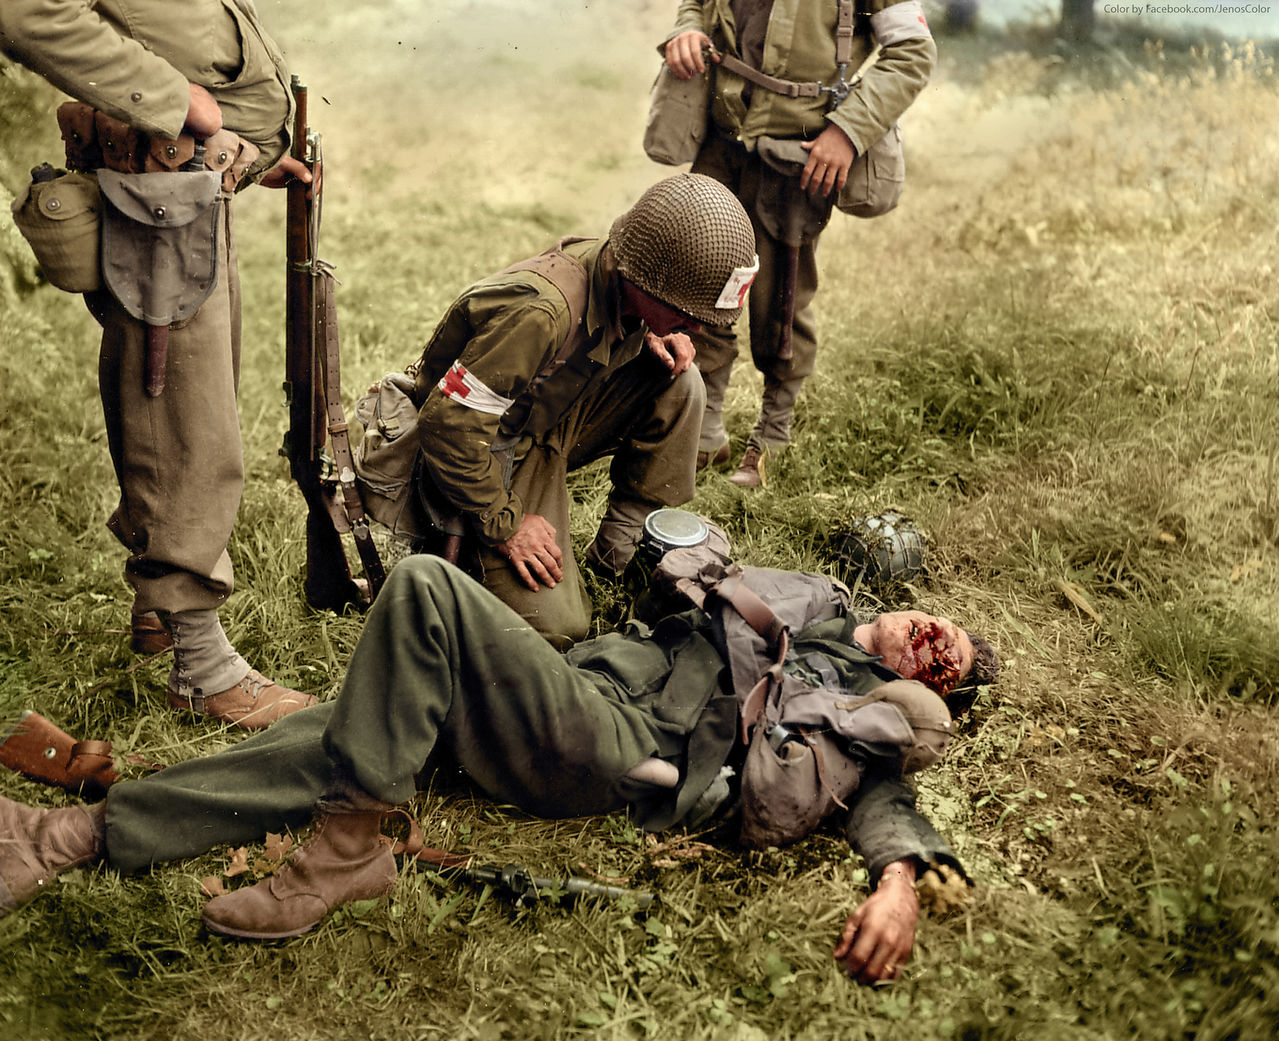 An American medic tends to a seriously injured German soldier who appears unconscious or dead, Normandy, Saint-Lo, June 1944.